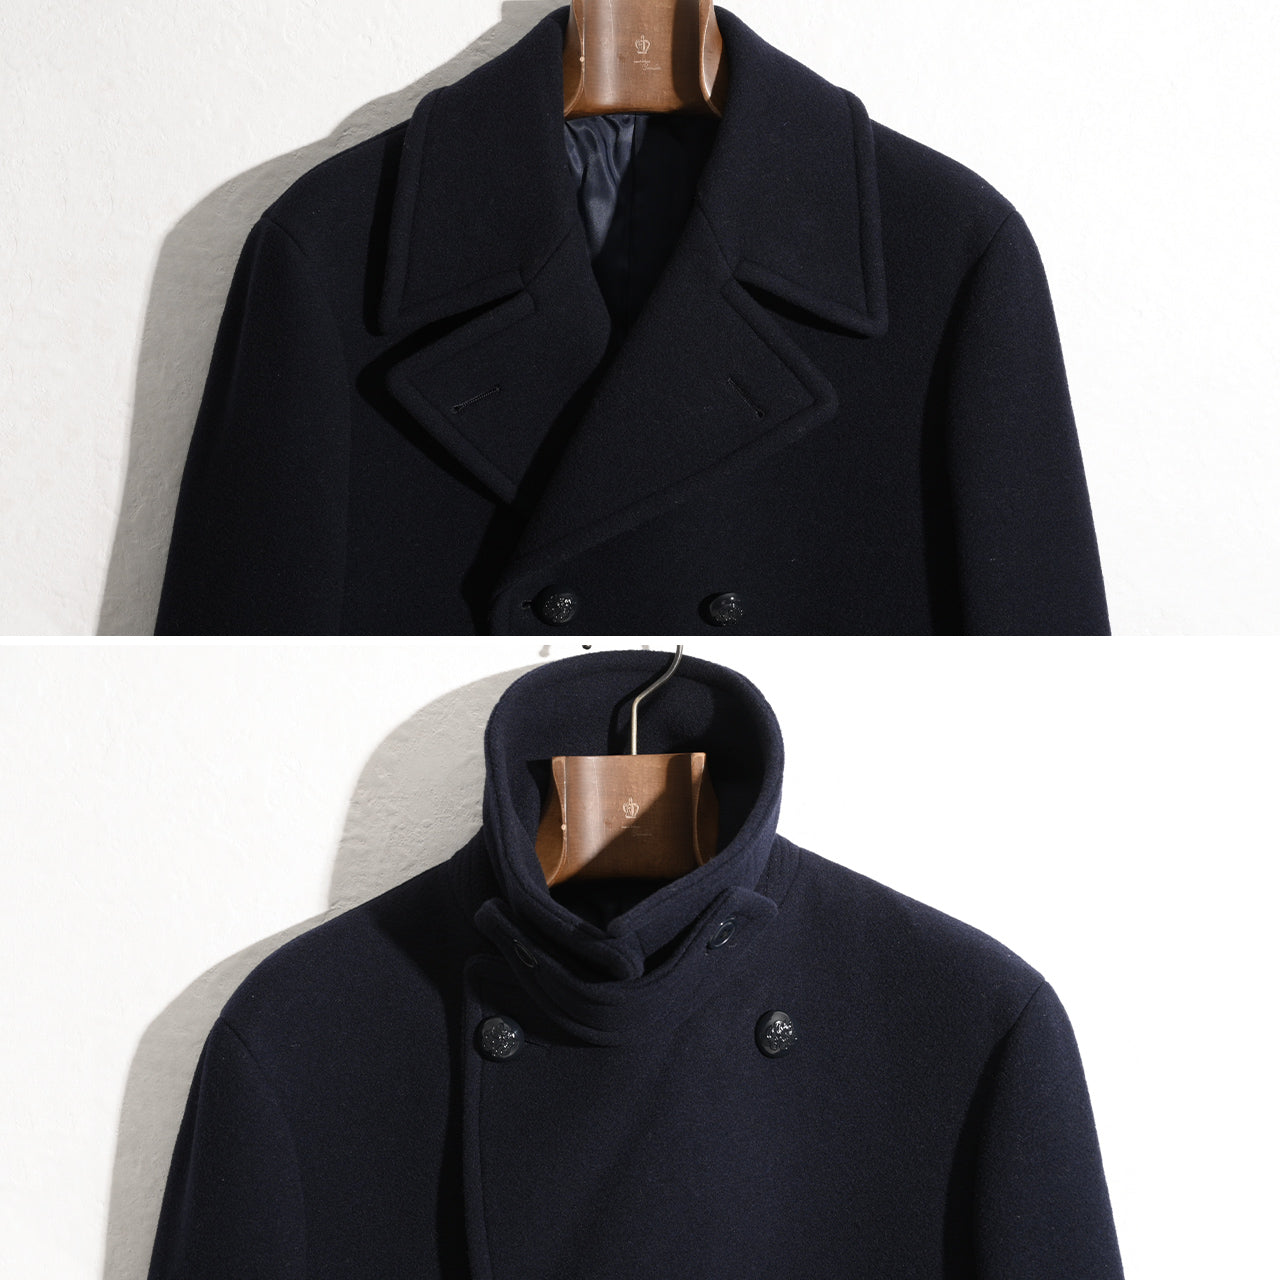 J.PRESS Jプレス Pコート P-COAT SOFT MELTON COOASW0054